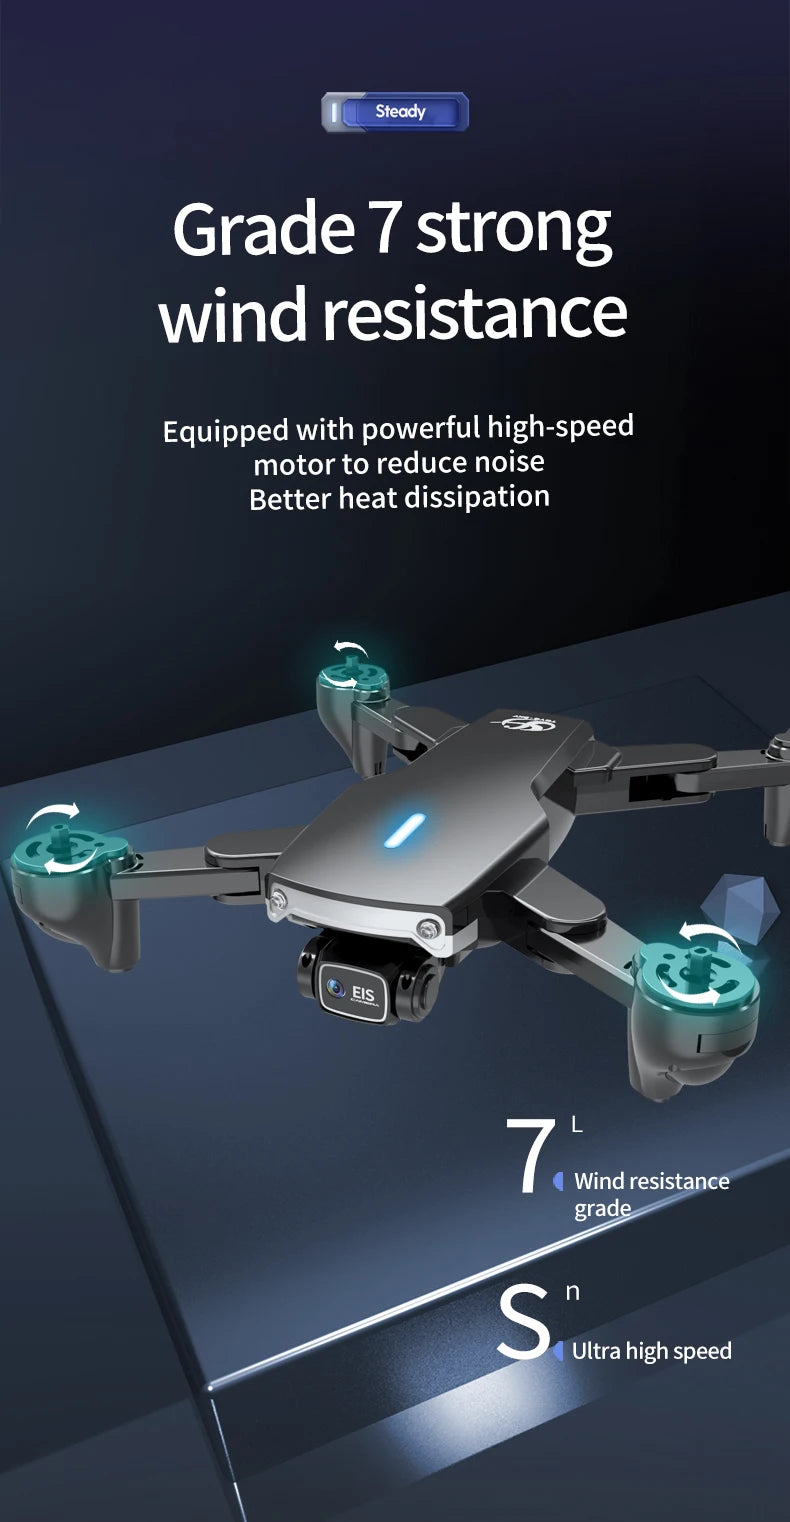 S169 Drone, steady grade 7 strong wind resistance equipped with powerful high-speed motor to